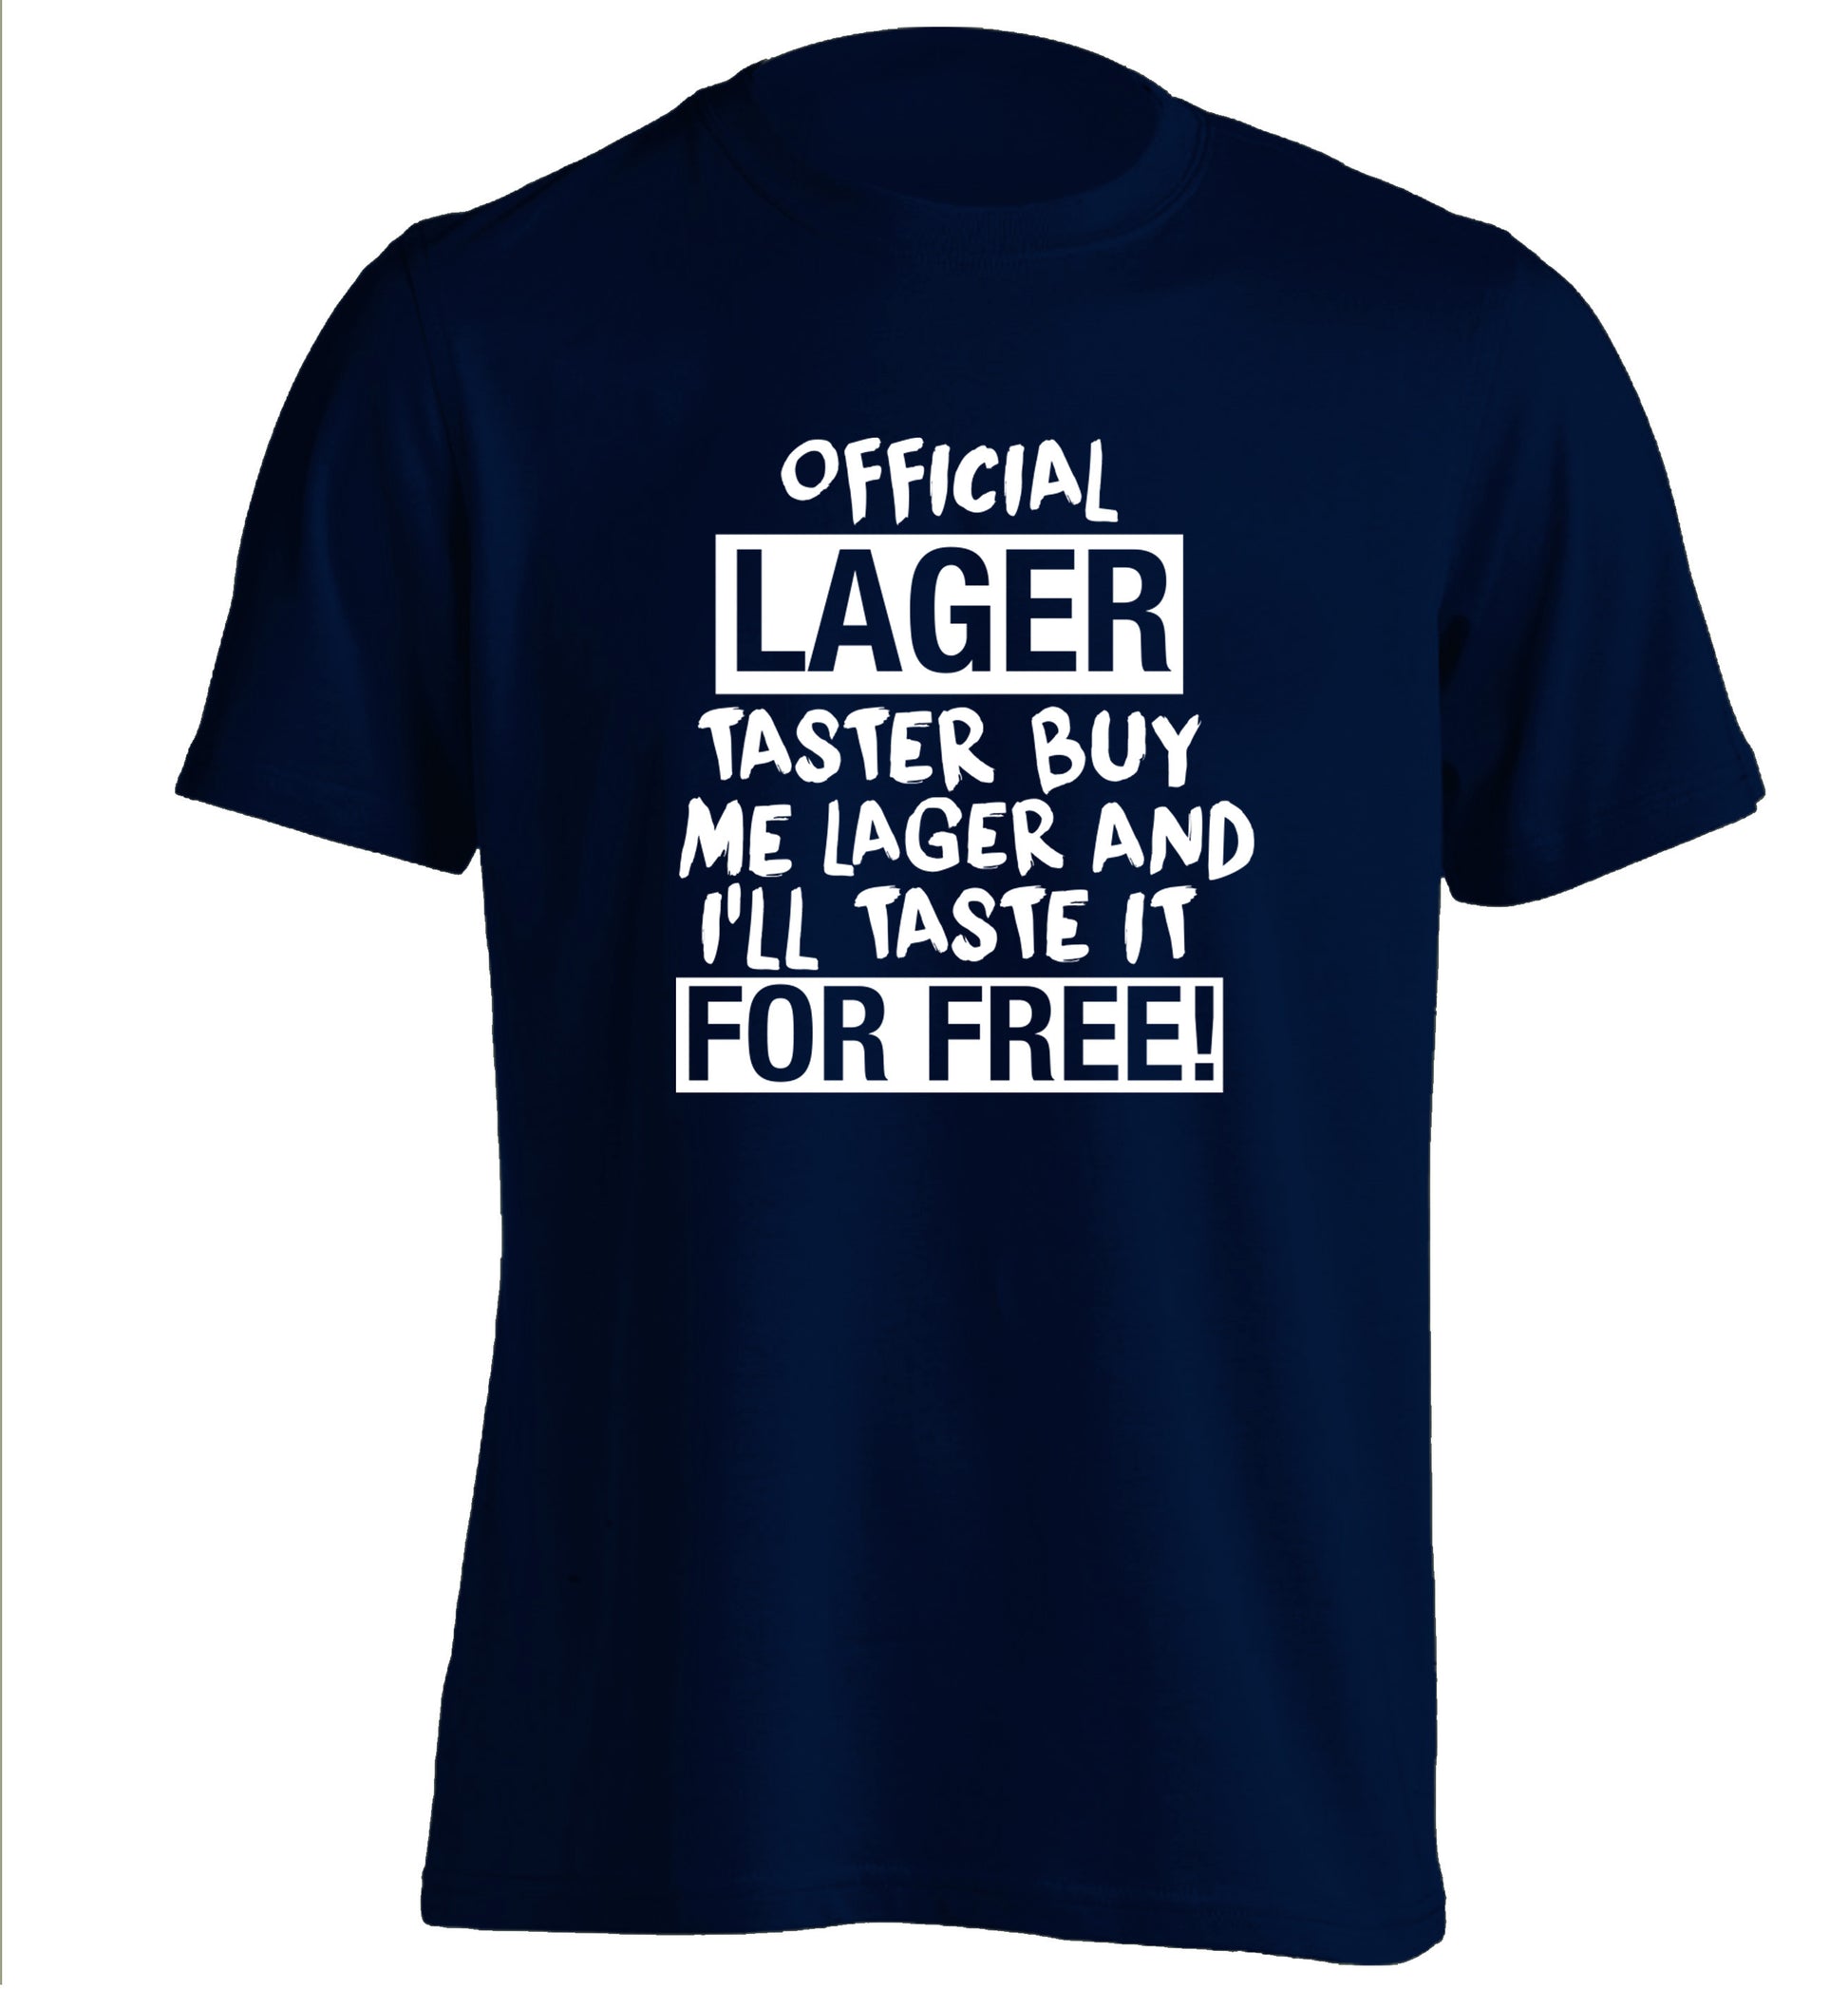 Official lager taster buy me lager and I'll taste it for free! adults unisex navy Tshirt 2XL